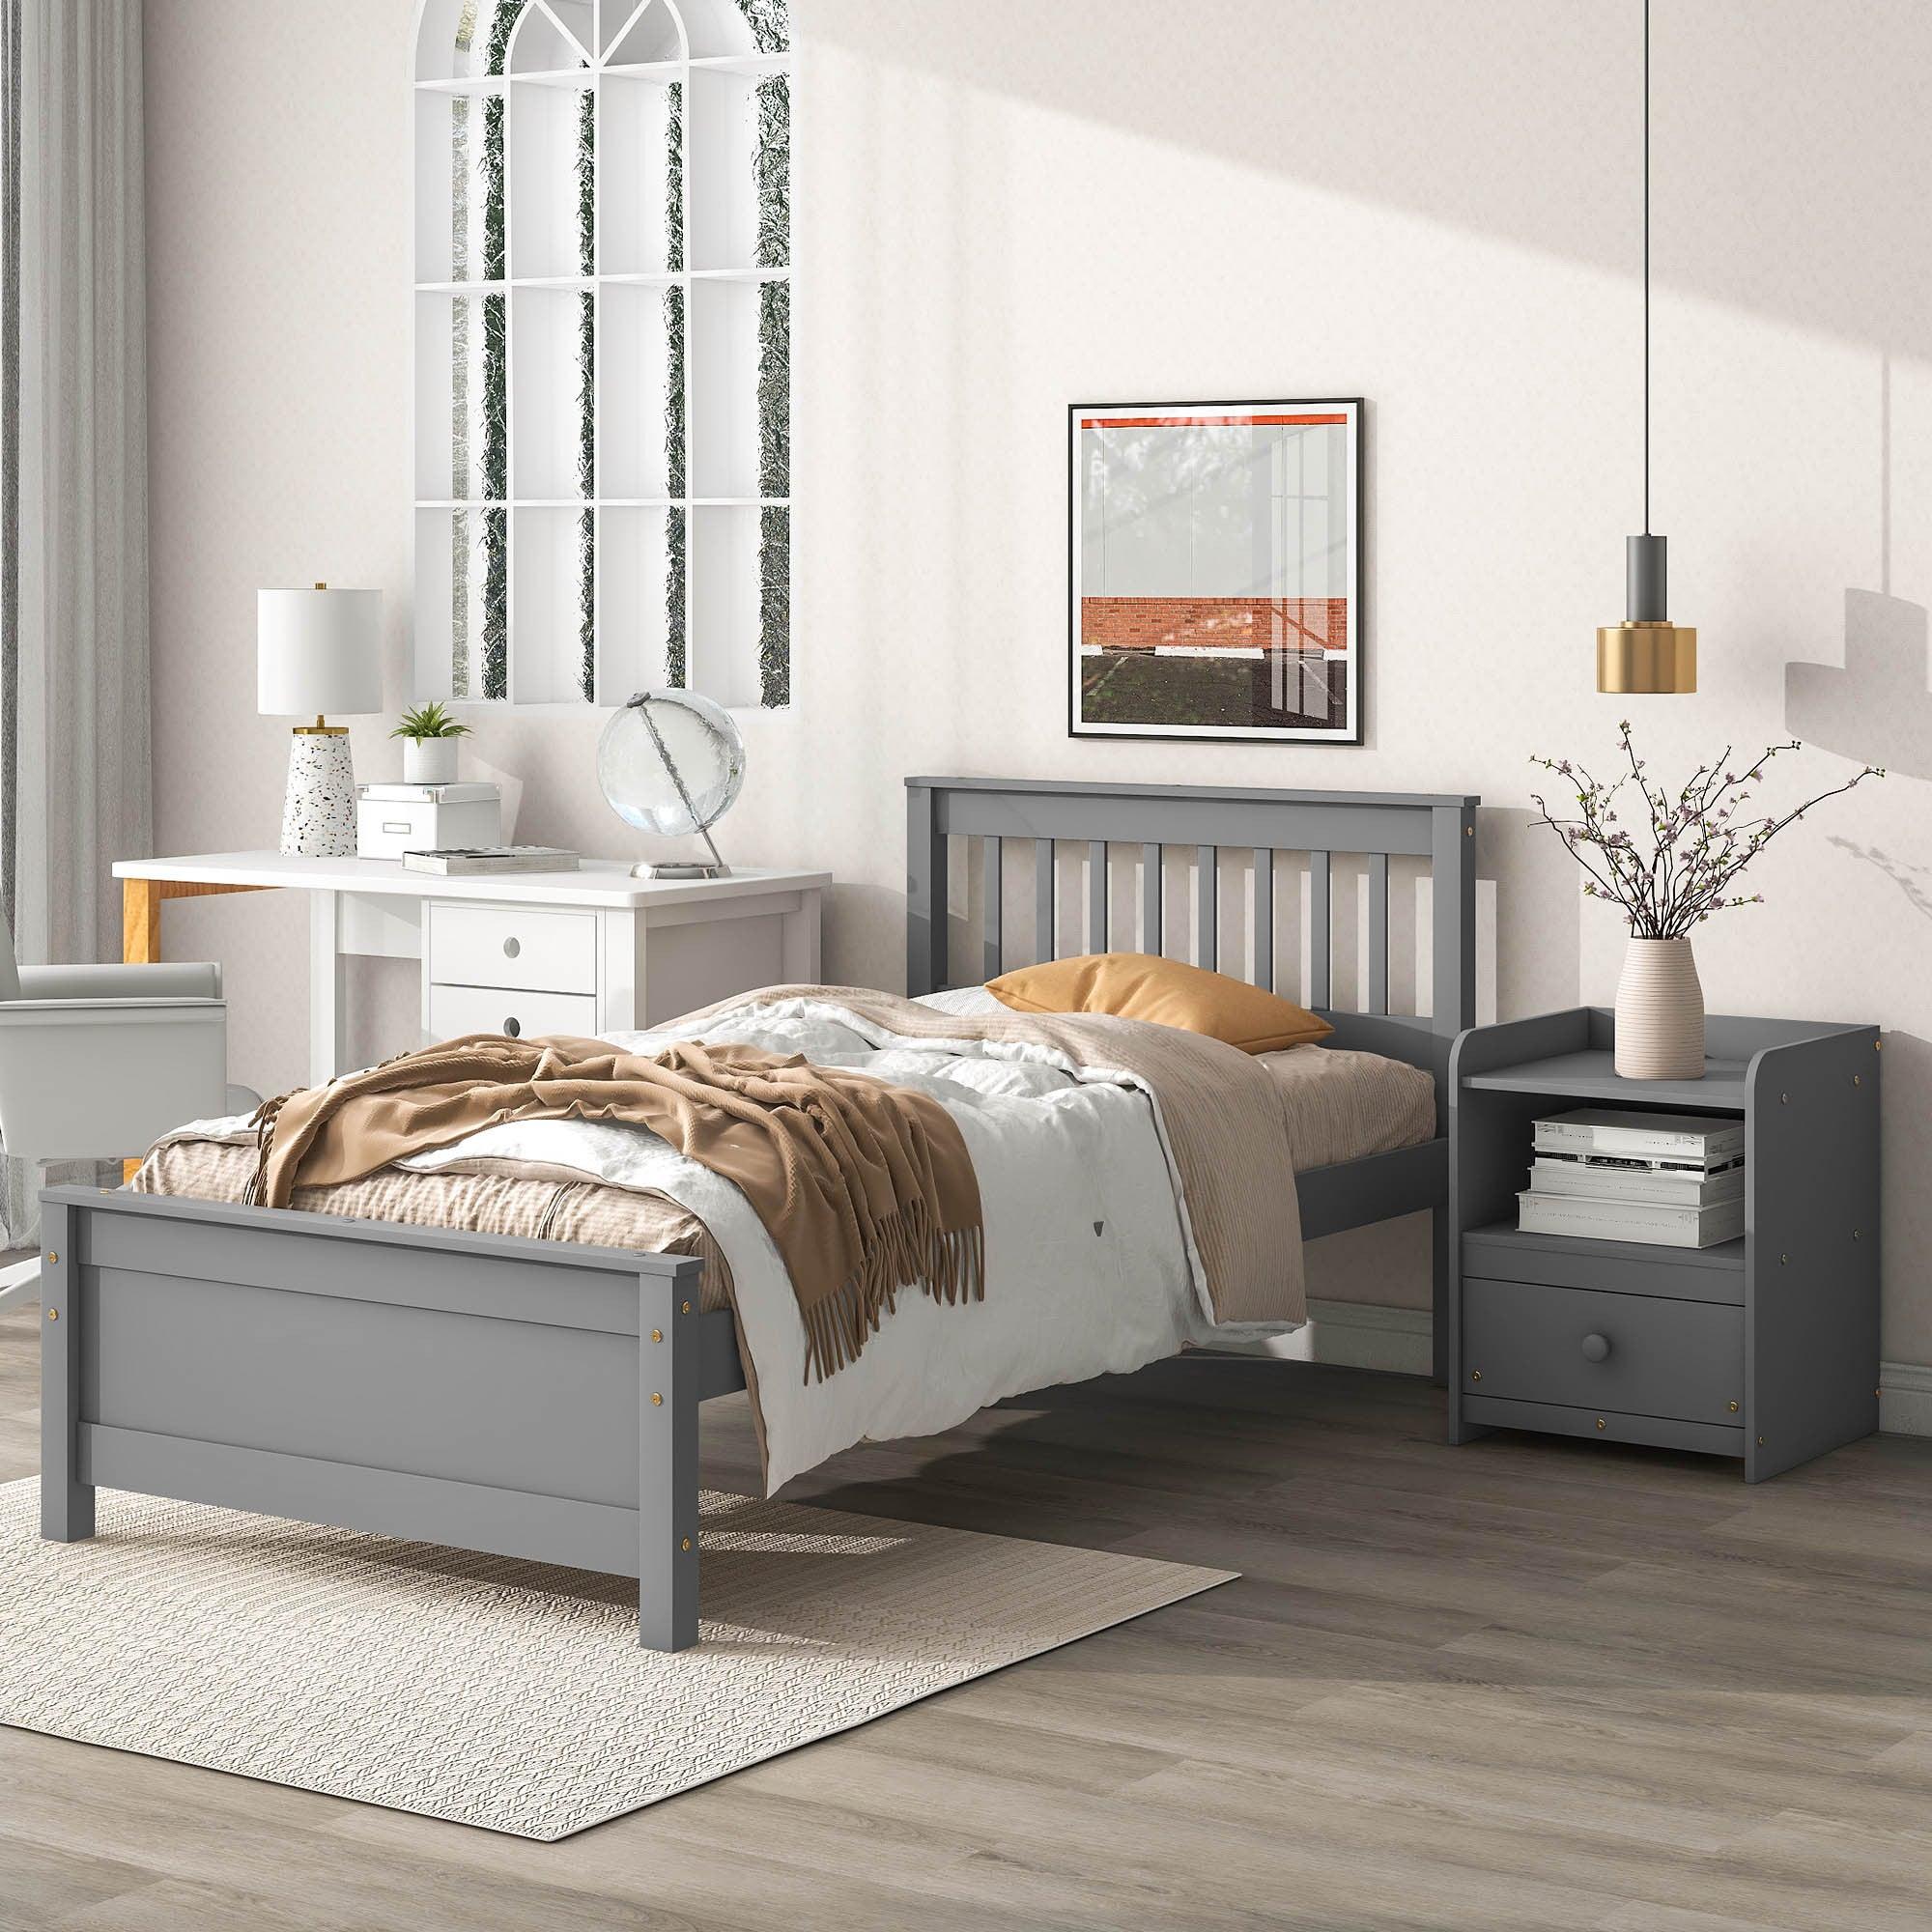 🆓🚛 Twin Bed With Headboard & Footboard for Kids, Teens & Adults With a Nightstand, Gray